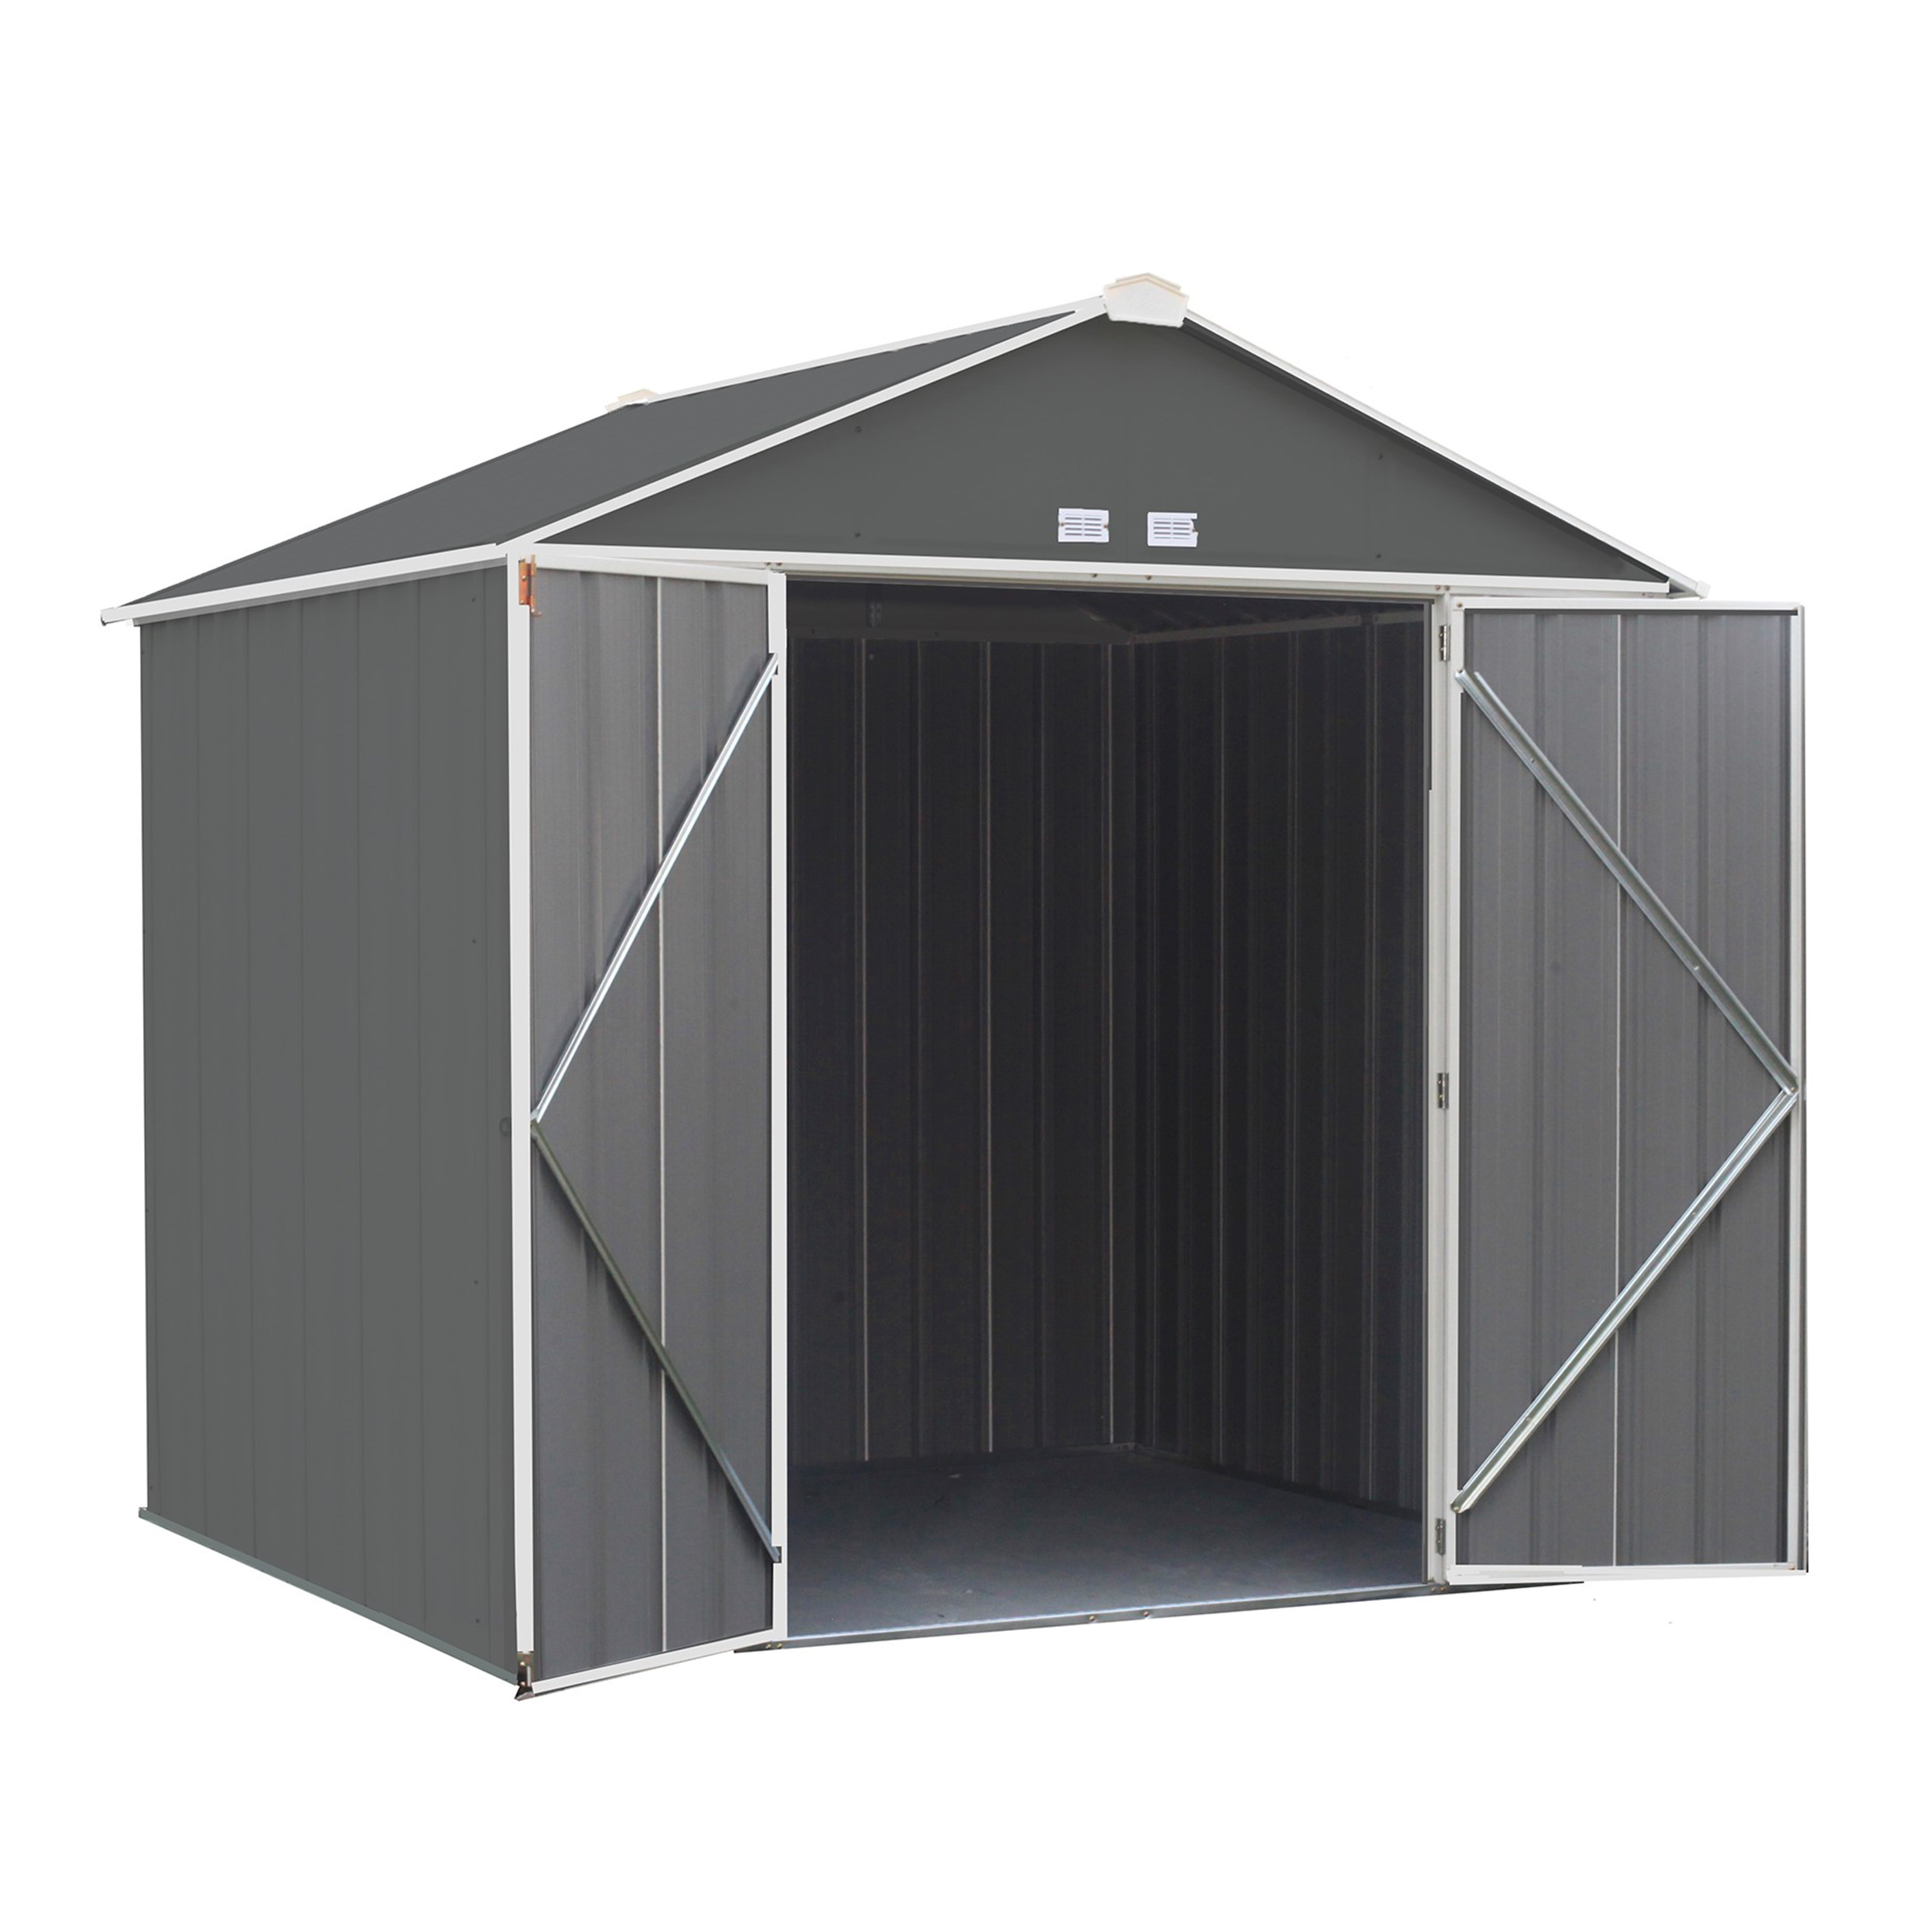 Ezee Shed , 8x7, High Gable, 72 In Walls, Vents Charcoal & Cream